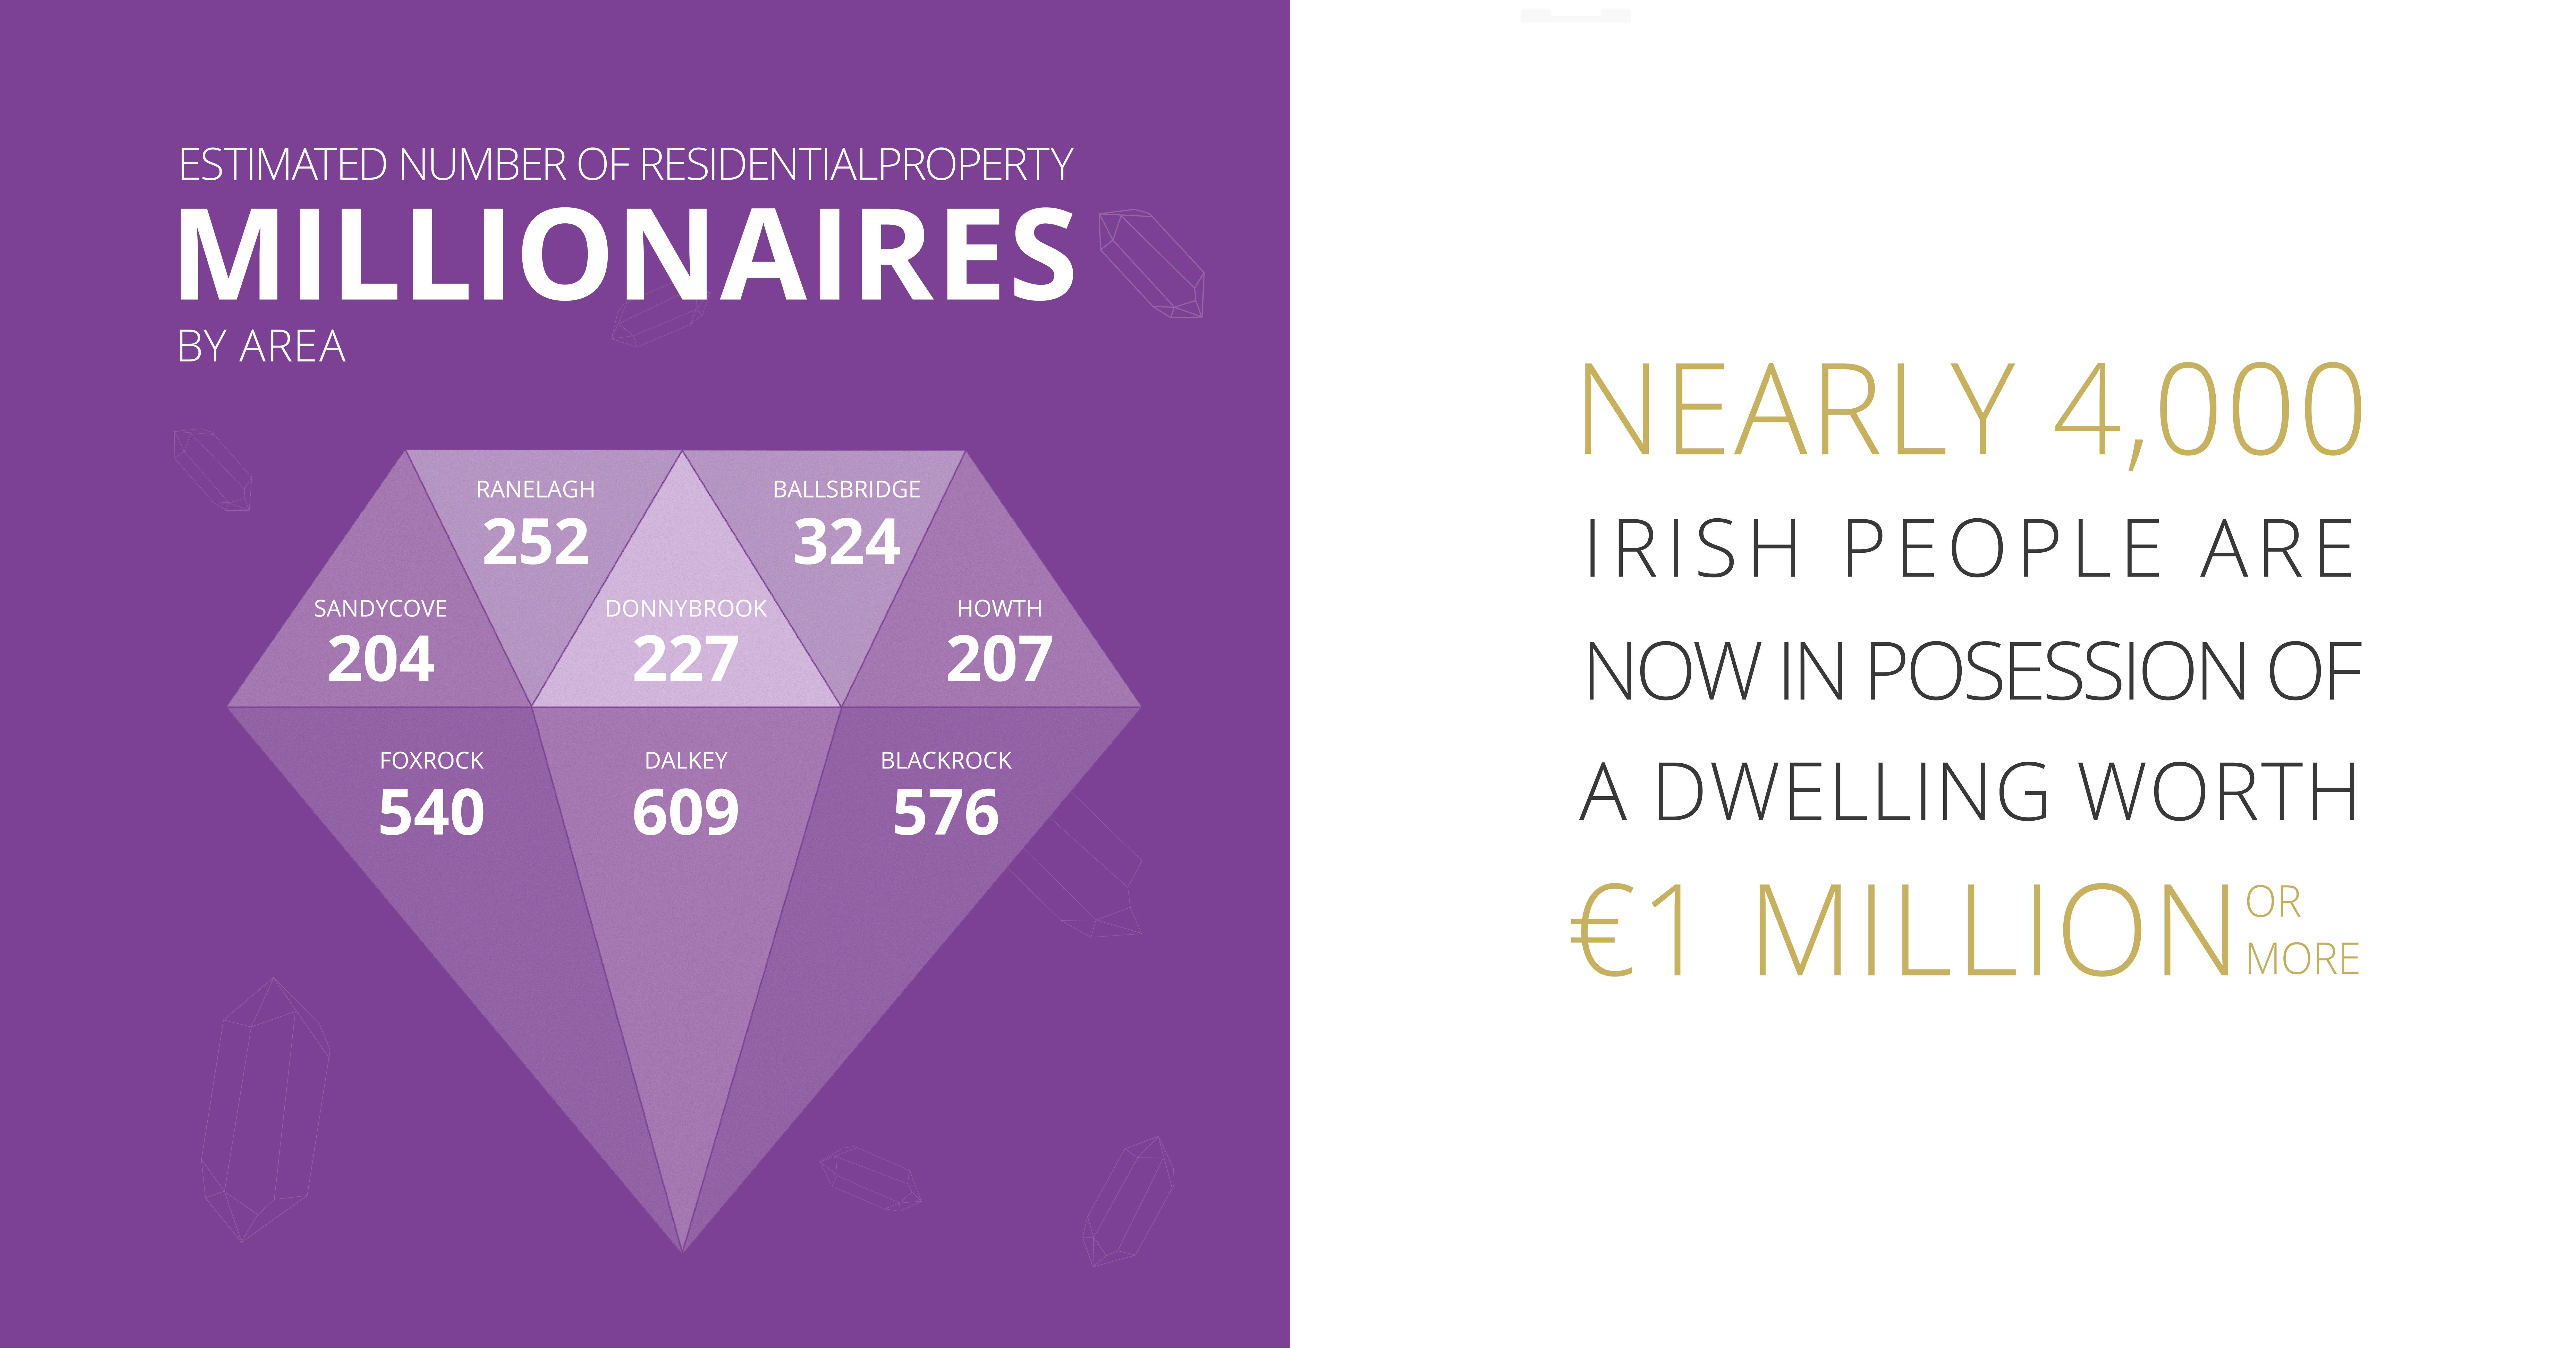 Estimated number of residential property millionaires by area